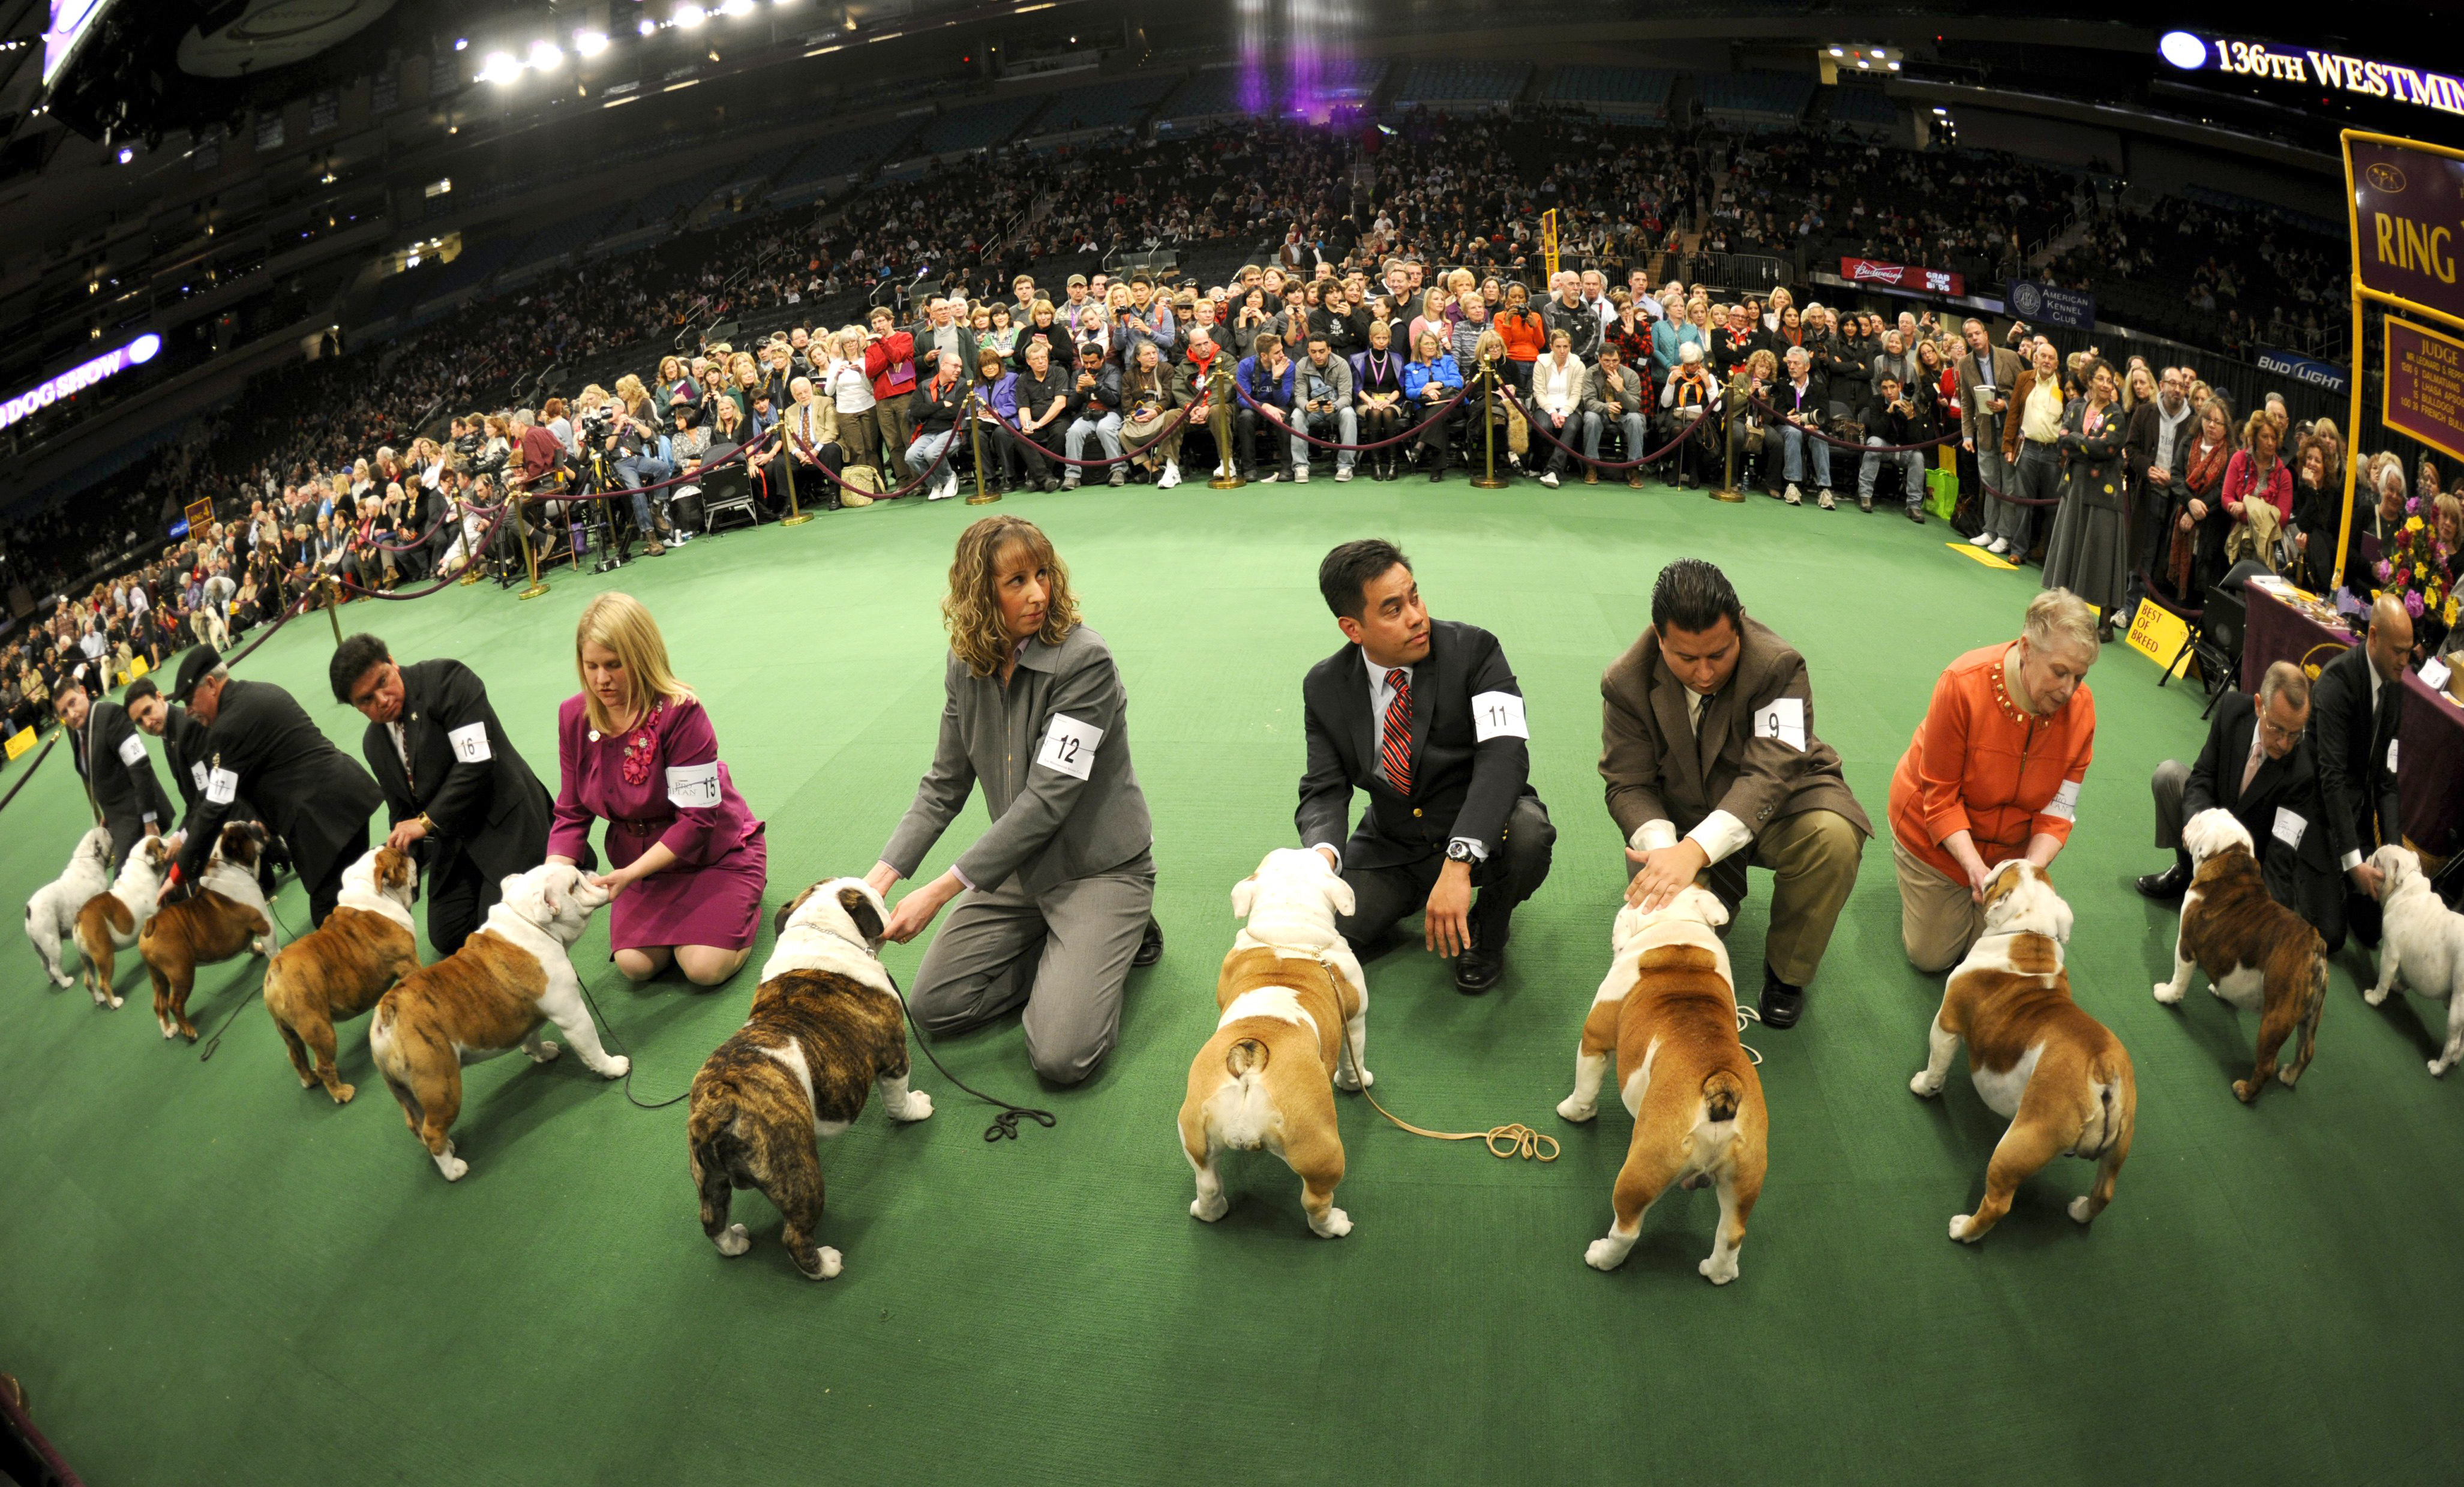 Bulldogs in the competiton ring during the 136th Westminster Kennel Club Annual Dog Show held at Madison Square Garden. The English bulldog, with its squat, face, enormous under bite and bulging eyes -- has surged in popularity in recent years. But the very traits that make them lovable are causing the dogs to suffer chronic health problems. The British Kennel Club has revised its standards for the breed. But American enthusiasts, at least for now, have no such plans. February 13, 2012. AFP PHOTO / TIMOTHY A. CLARY (Photo credit should read TIMOTHY A. CLARY/AFP/Getty Images)